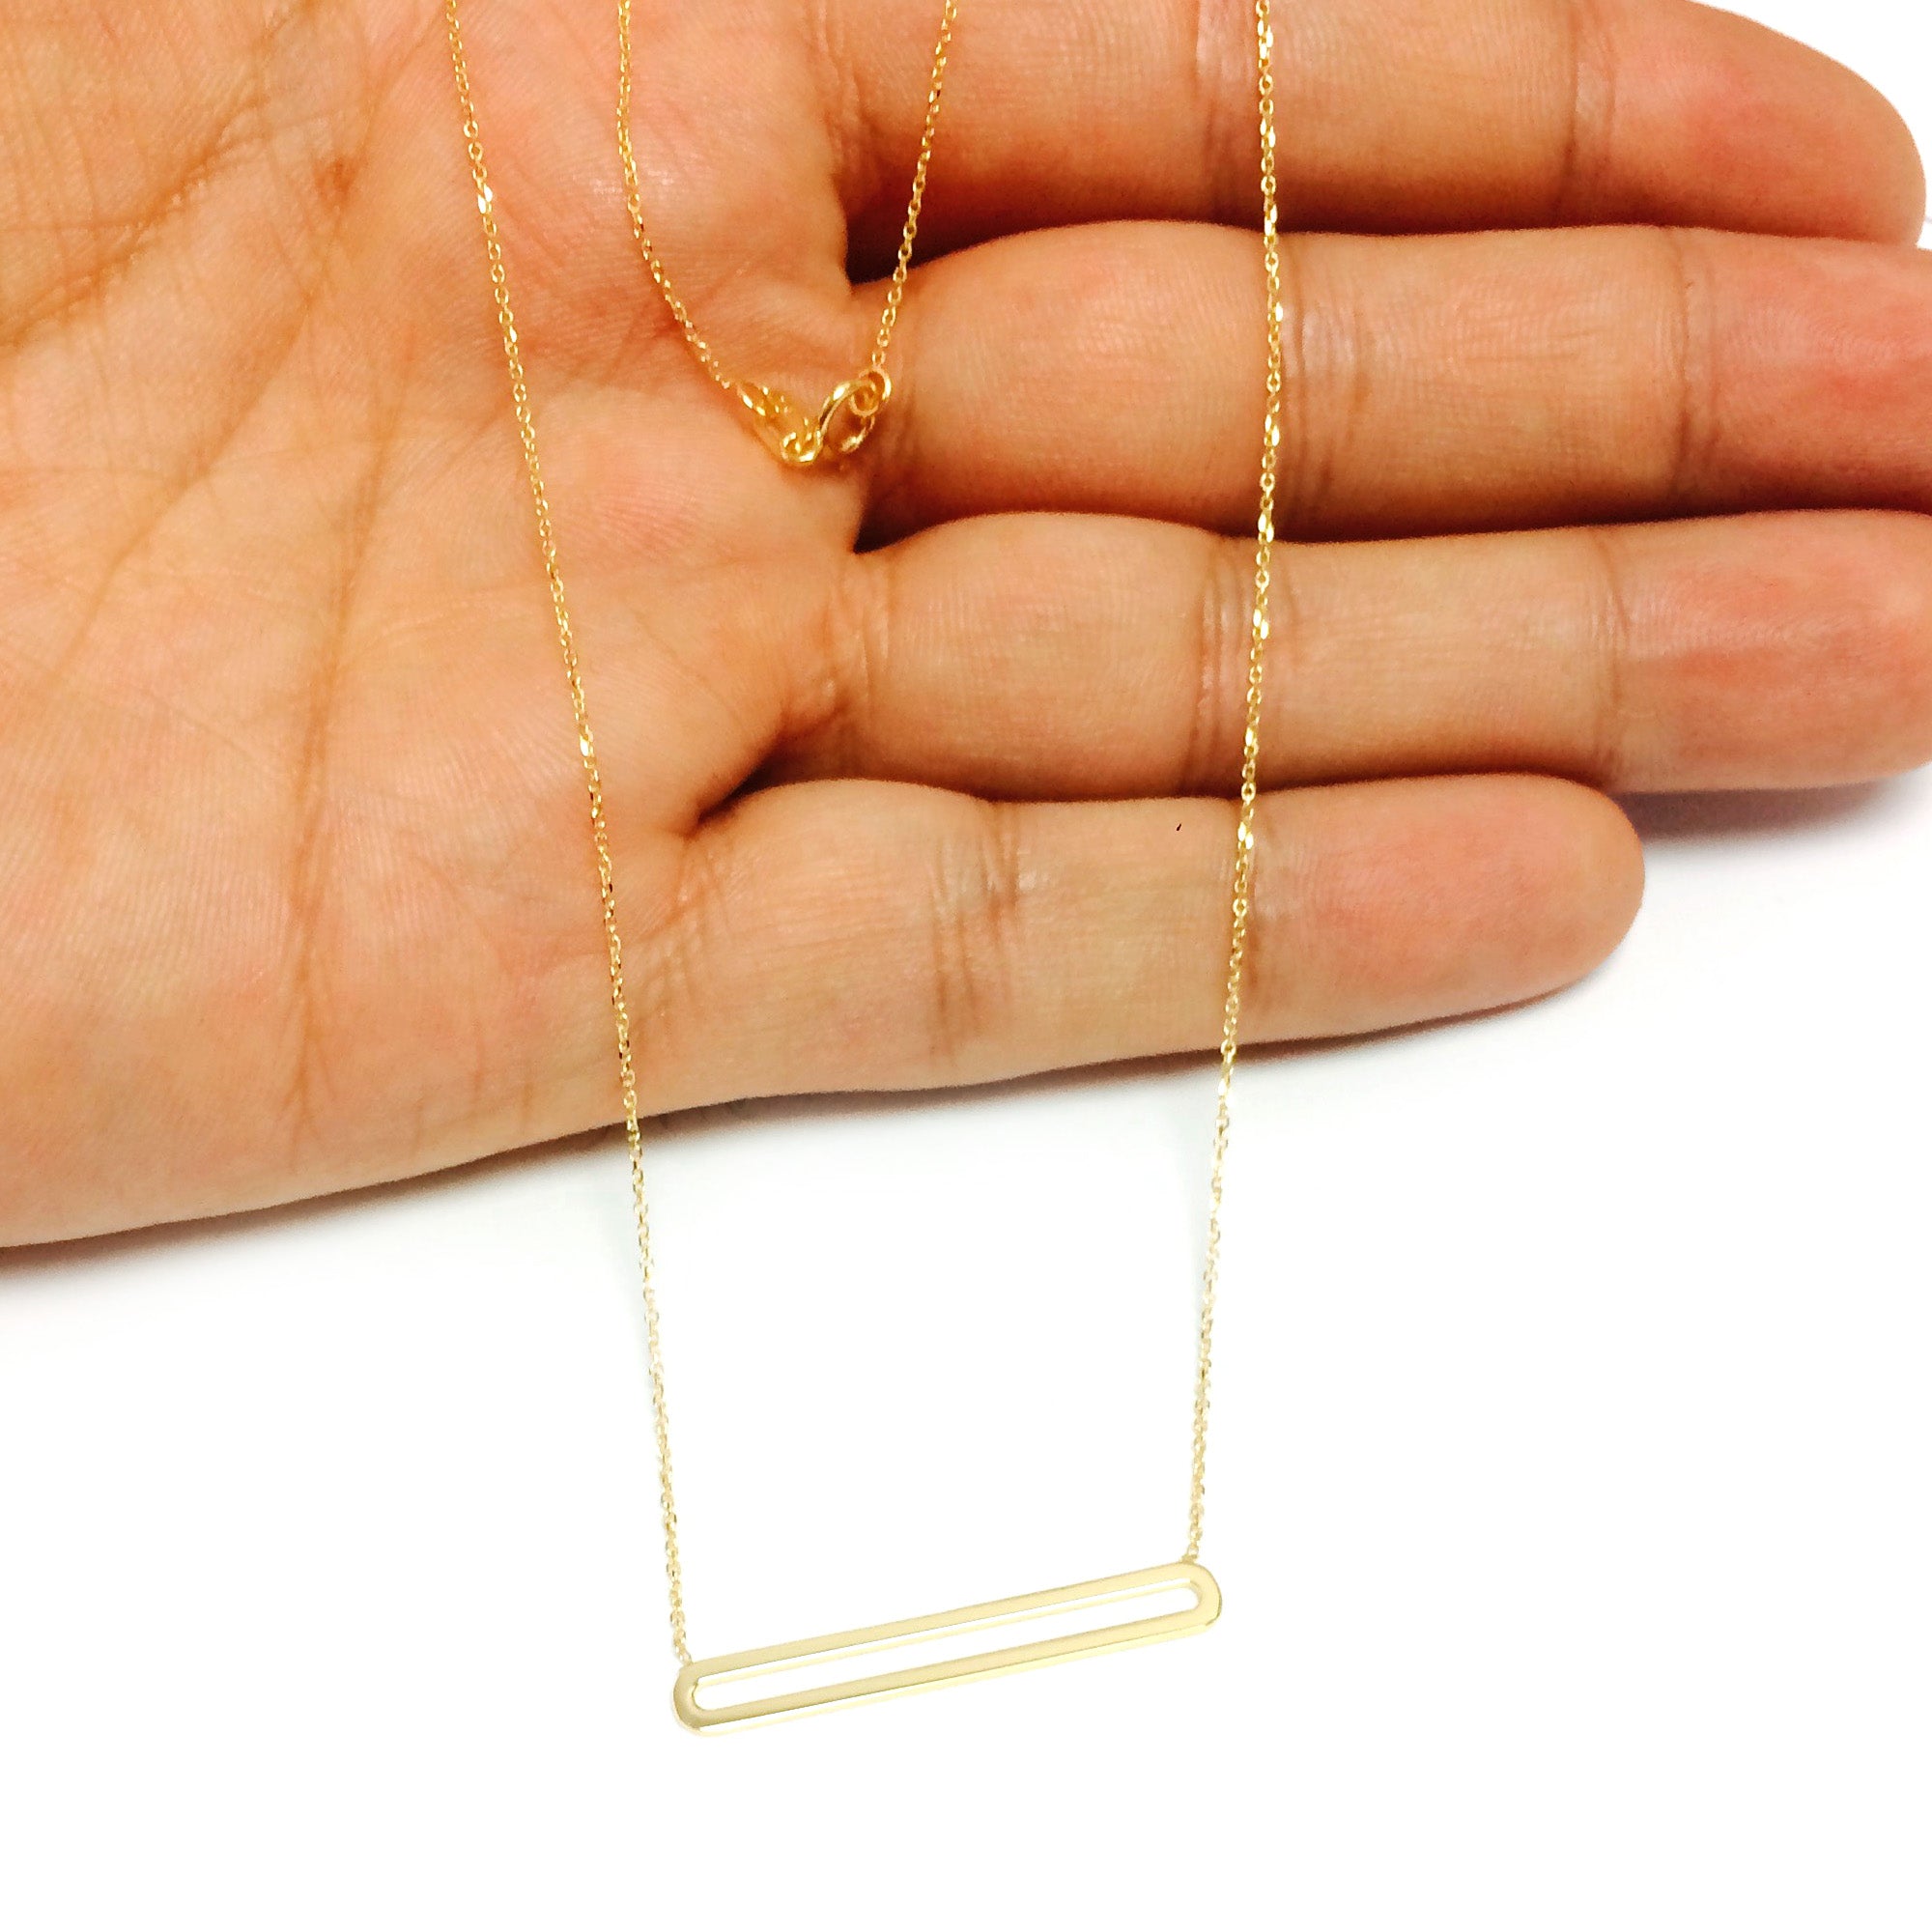 14K Yellow Gold Oval Bar Pendant Necklace, 18" fine designer jewelry for men and women